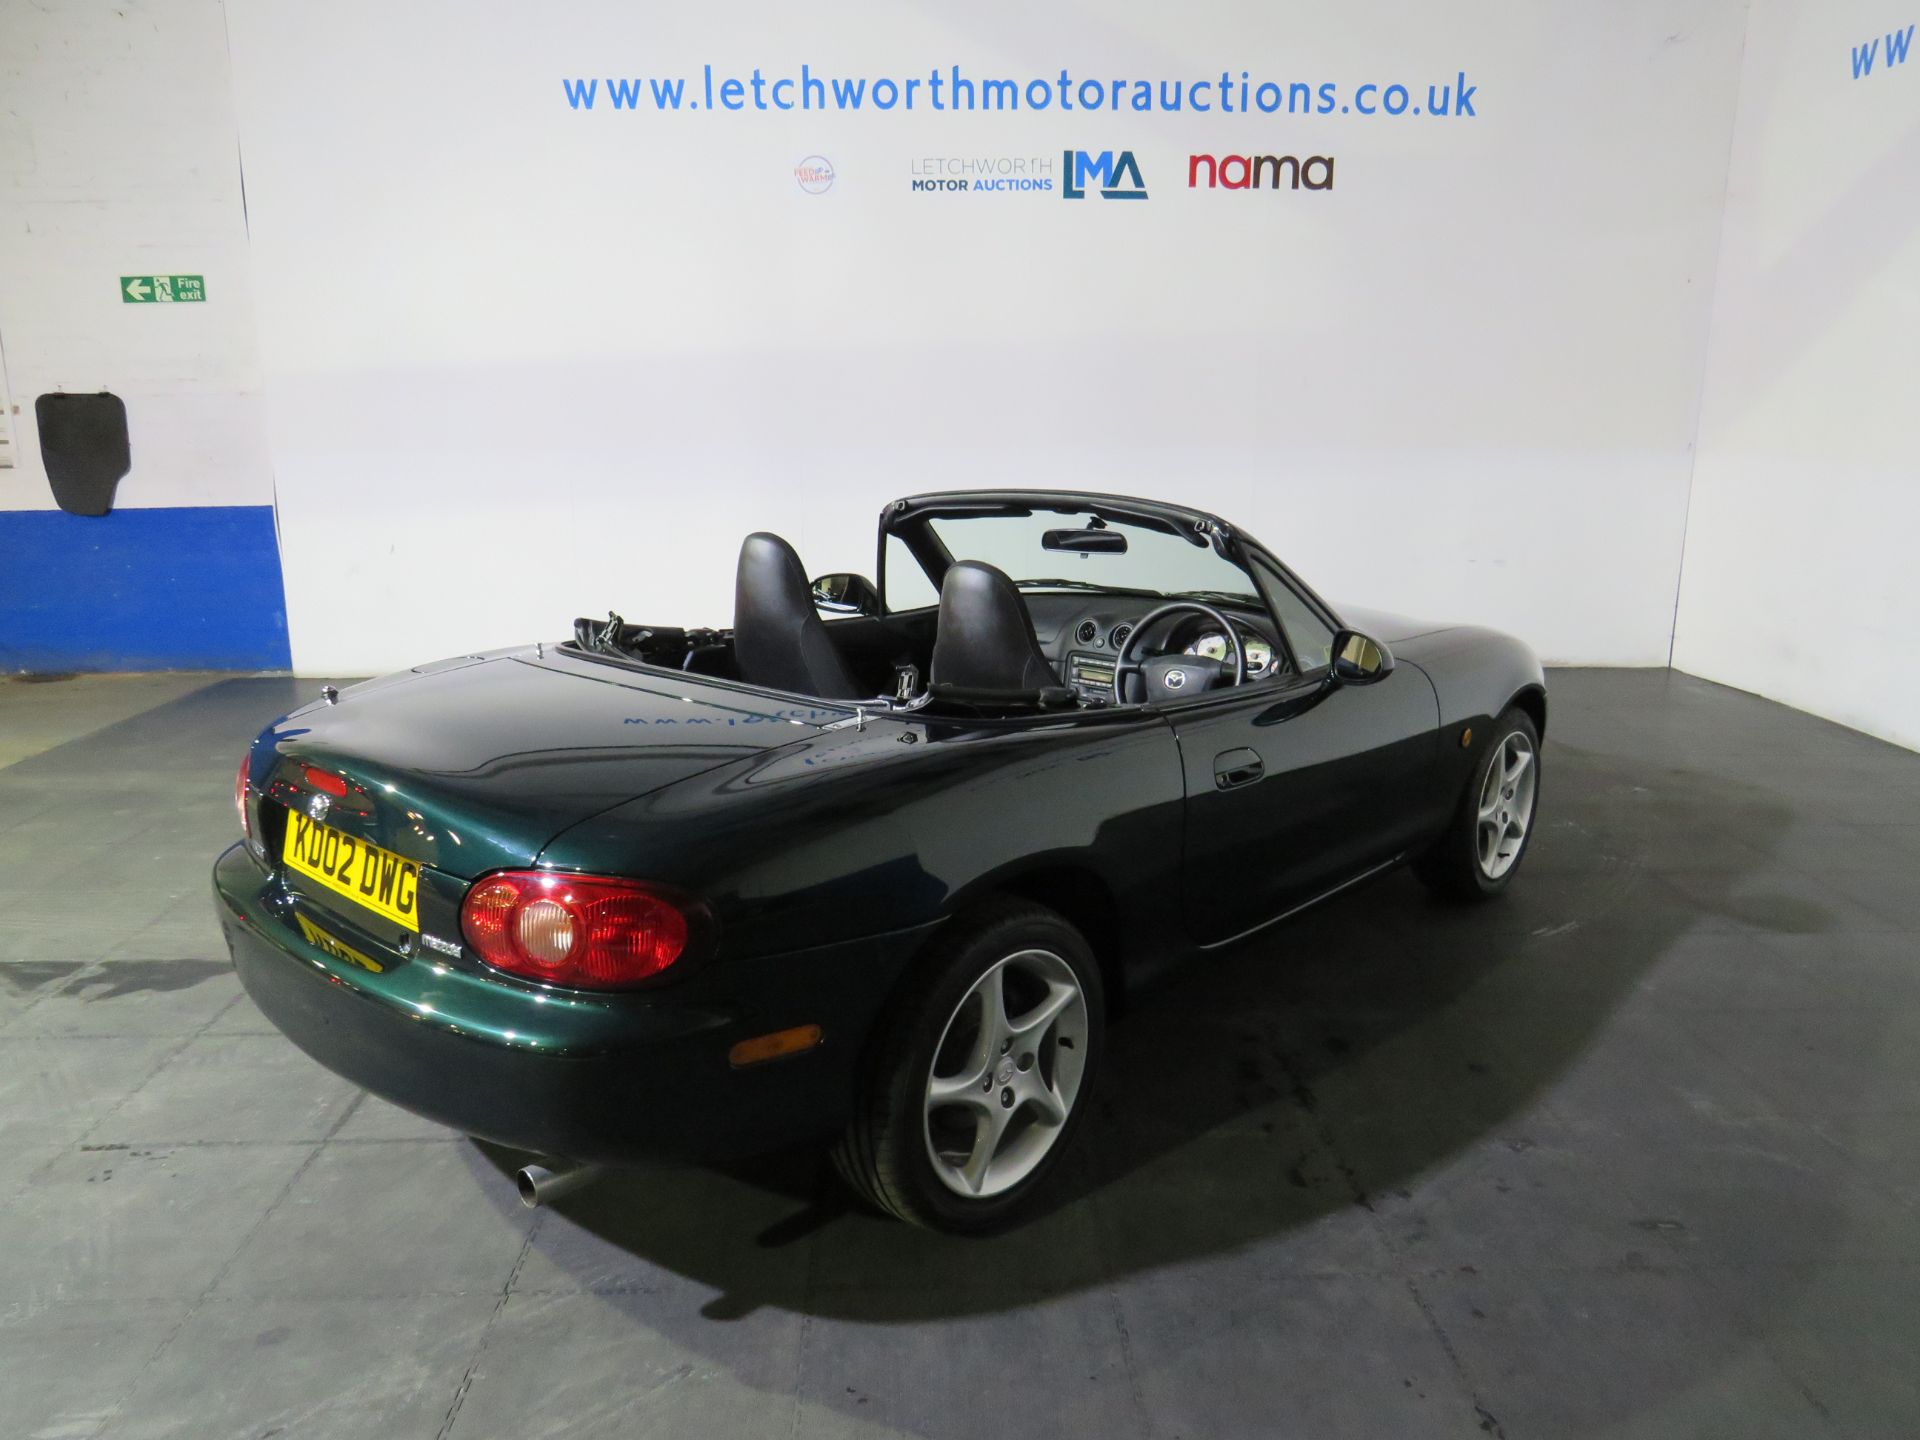 2002 Mazda MX-5 - 1598cc - 1,900 MILES FROM NEW - Image 11 of 39